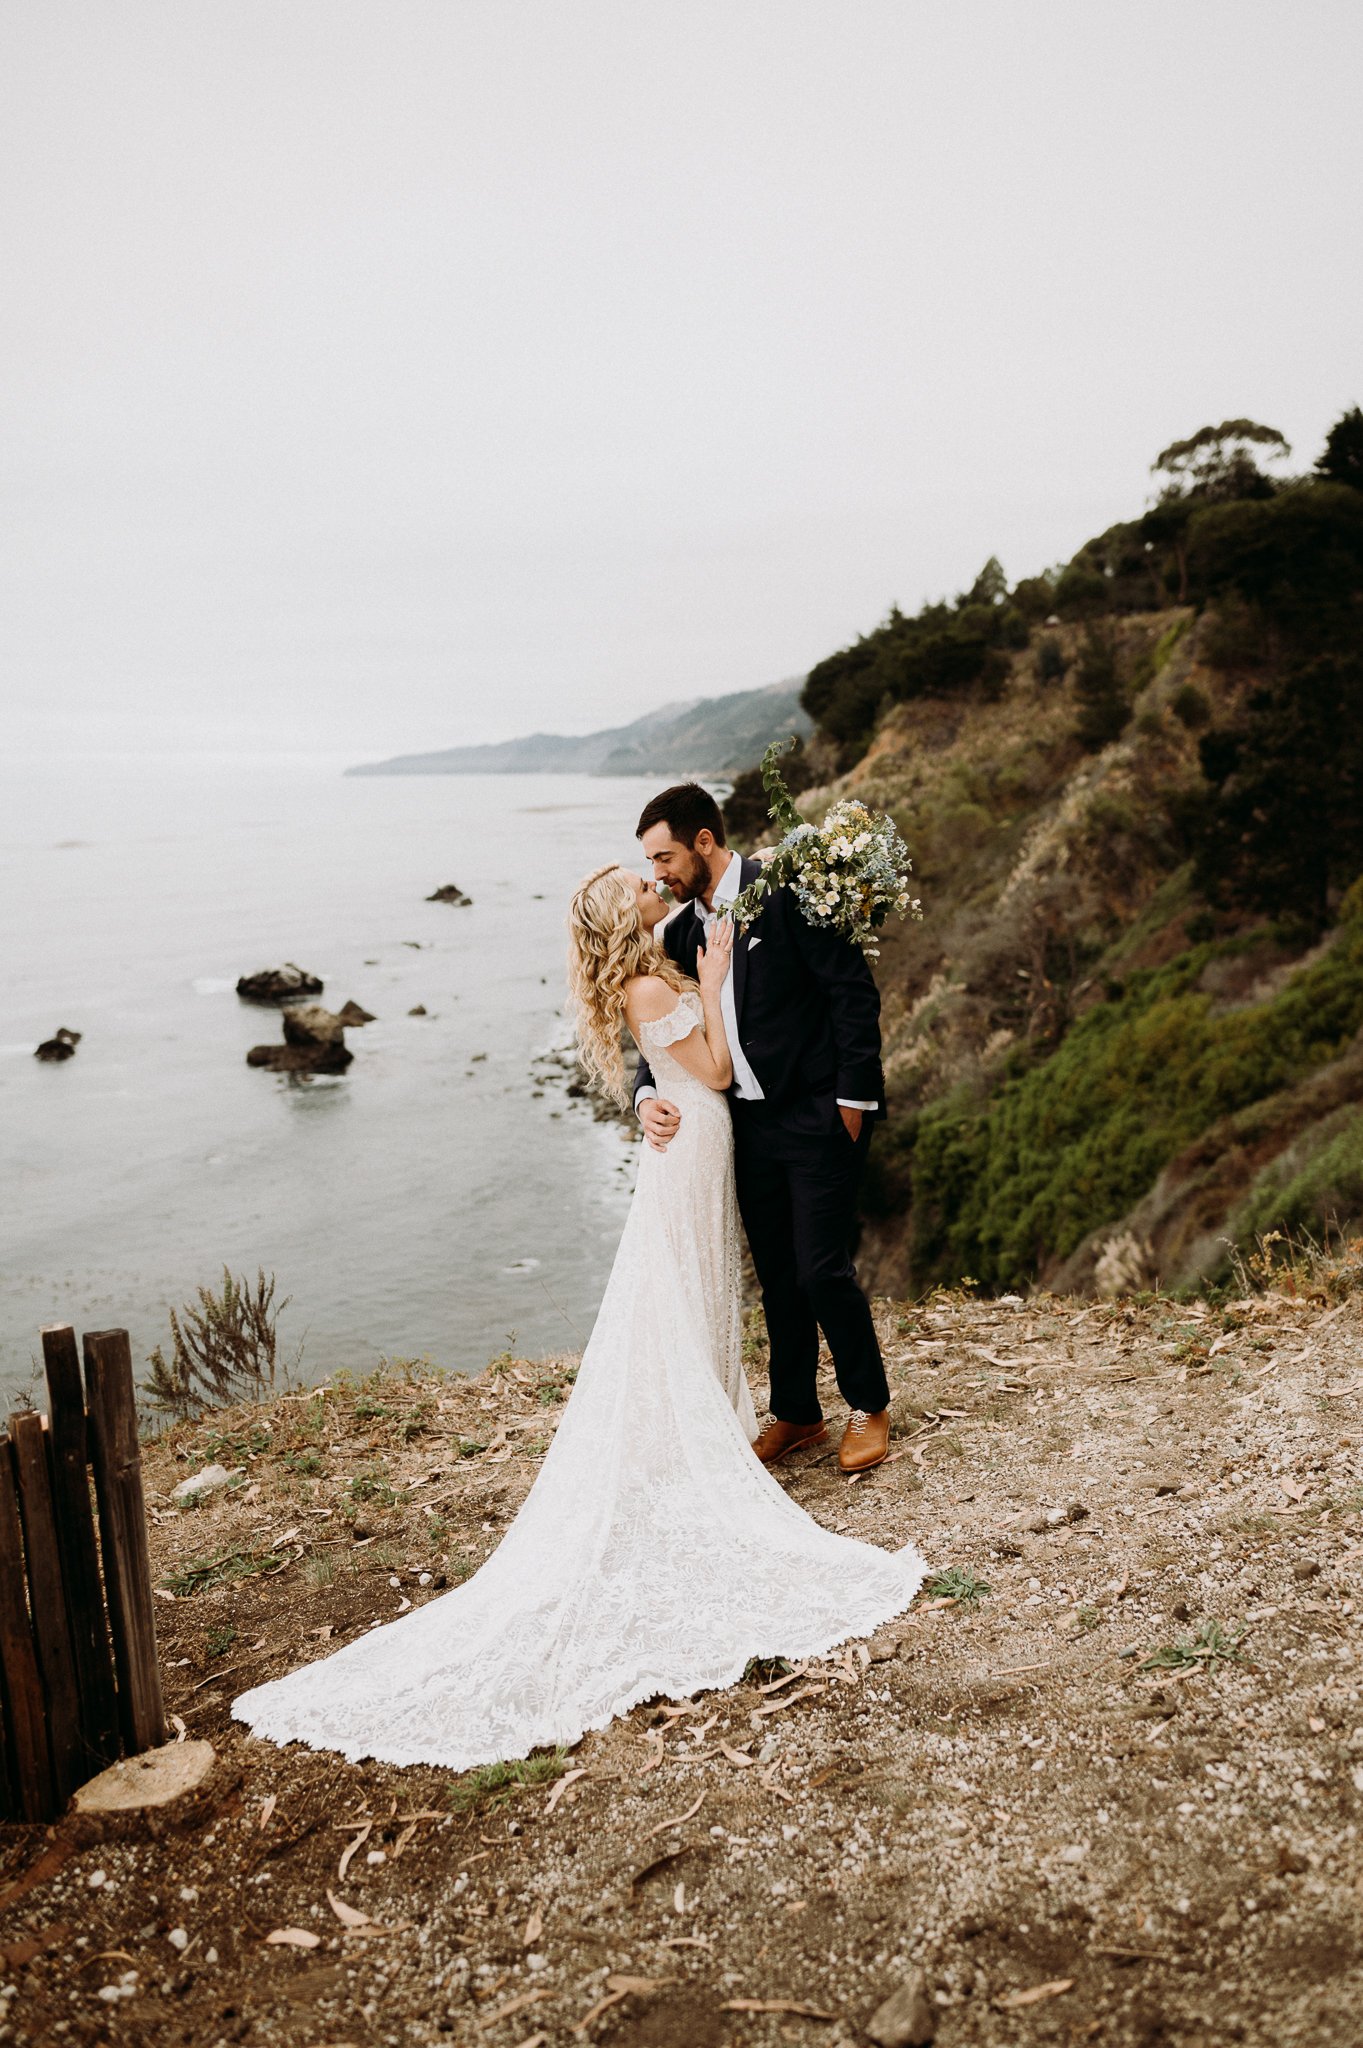 Bride and groom in wedding attire hugging on a cliff with pacific ocean in background